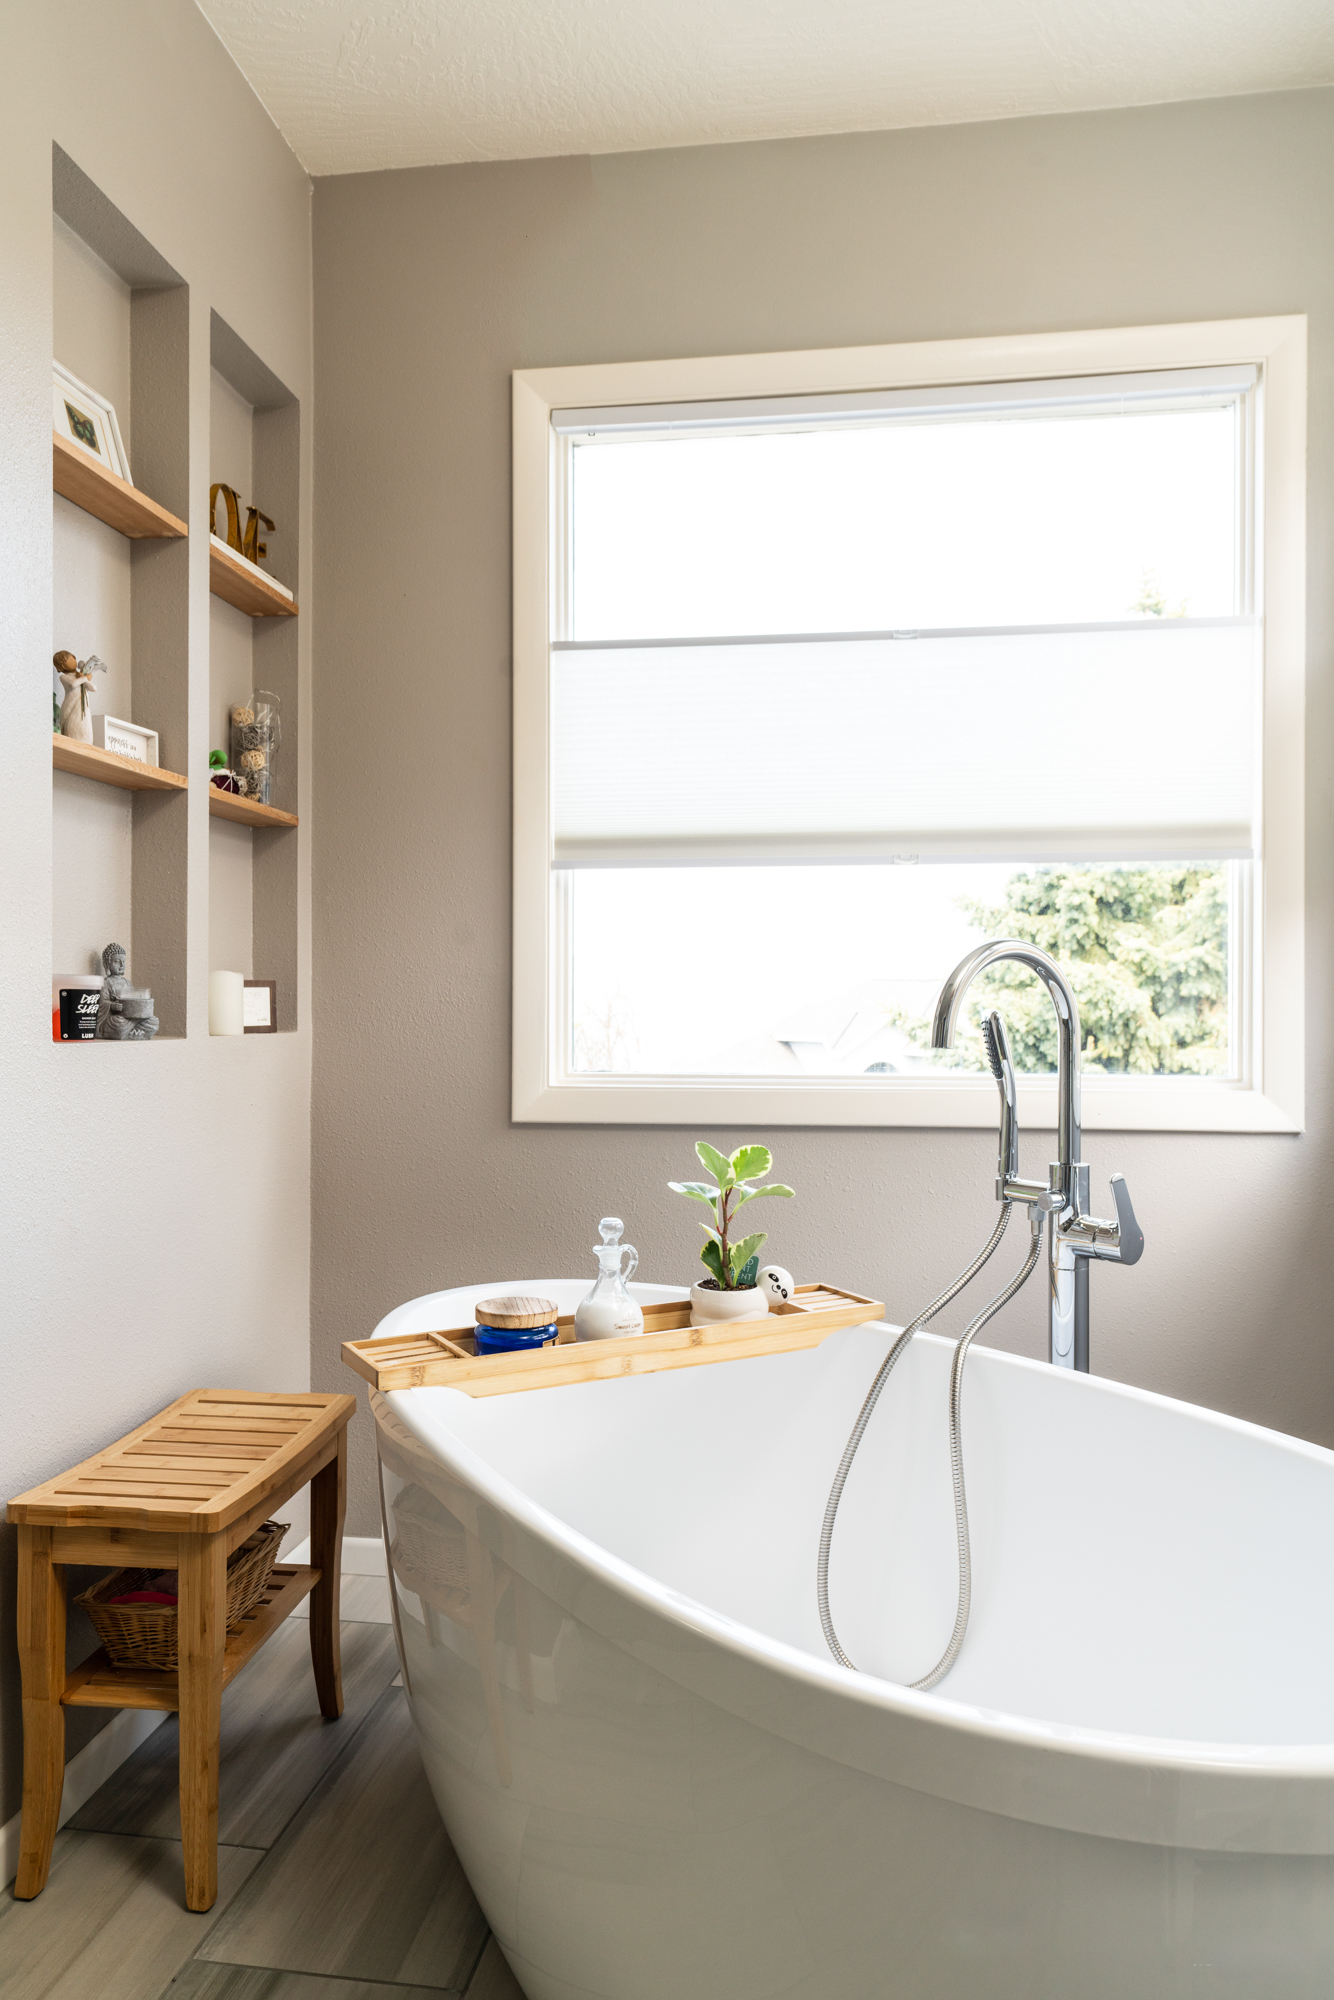 The image presents a modern bathroom setting, featuring:

Freestanding Bathtub: A sleek white tub near a large window, with a silver faucet and hand shower.
Natural Light: The window allows sunlight to brighten the space.
Wooden Stool: Positioned beside the tub, holding a blue bowl and greenery.
Built-in Shelves: Embedded in the wall, displaying bottles, jars, and decorative items.
Gray Tones: The walls and tiled floor have a light gray hue, complementing the overall aesthetic.
Photography Credit: The image was created by Photos in the House, Inc.
This description captures the essence of the bathroom’s design and ambiance.